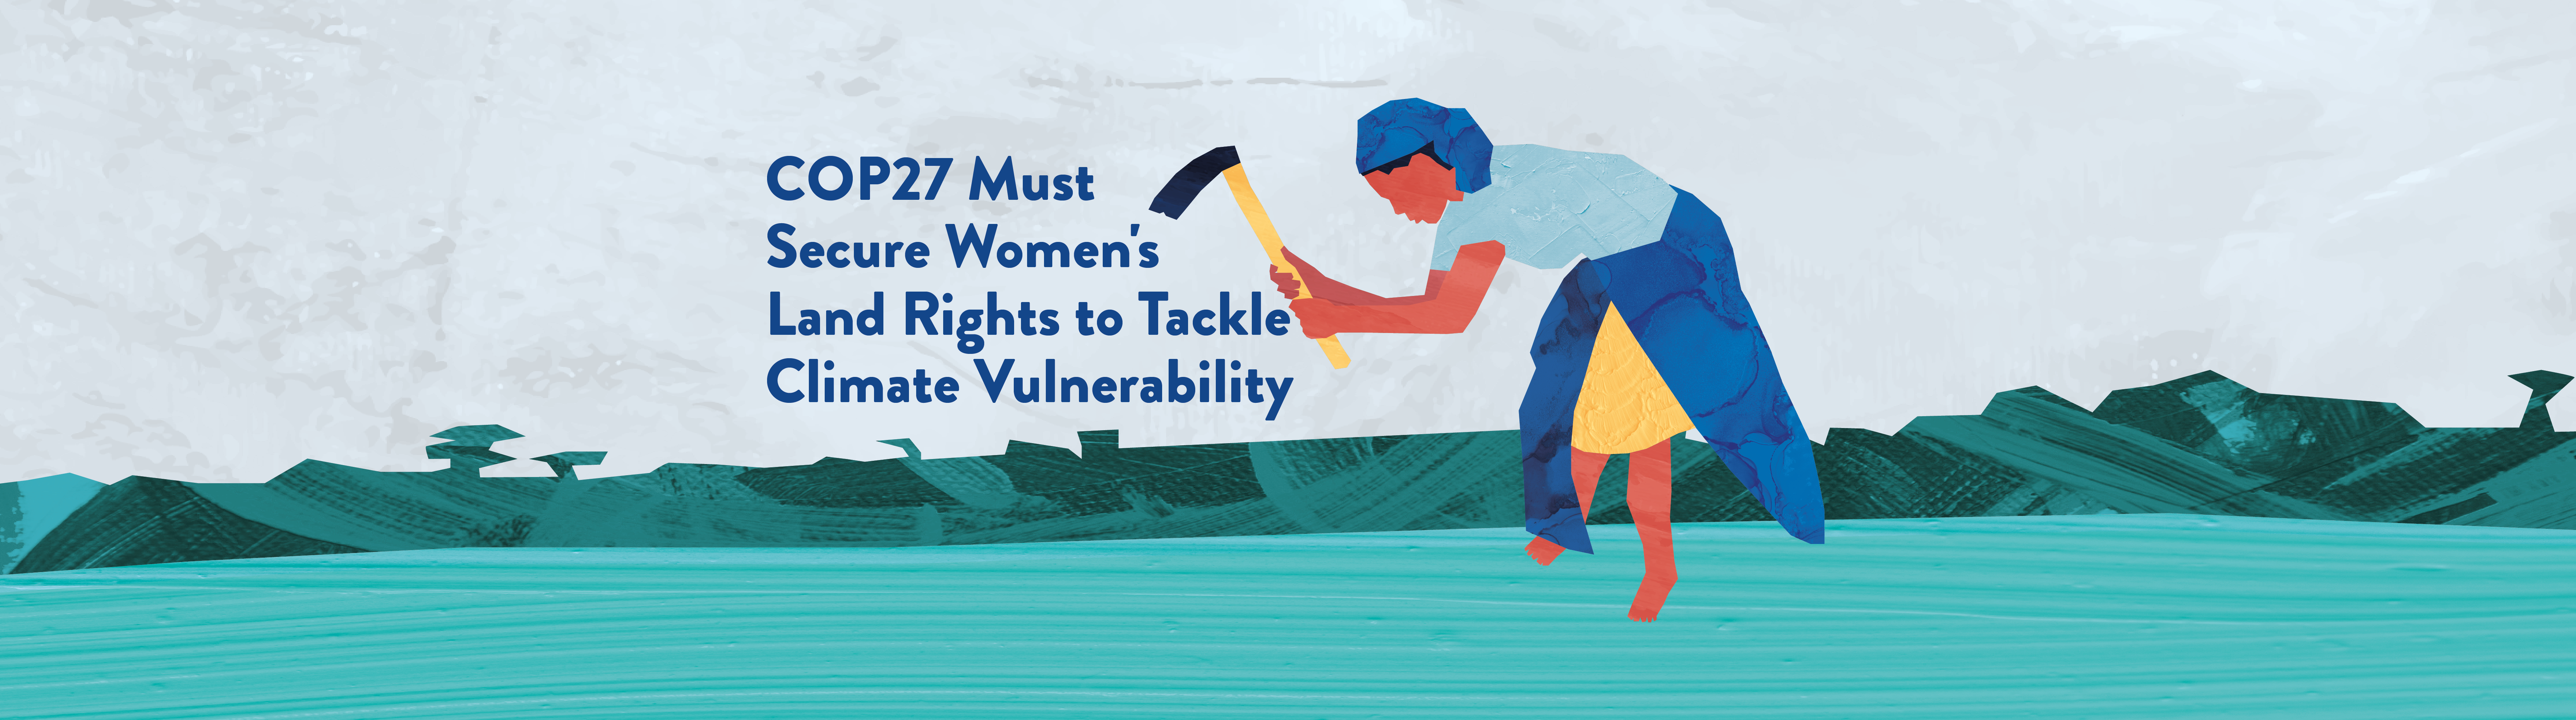 COP27 Must Secure Women’s Land Rights to Tackle Climate Vulnerability 